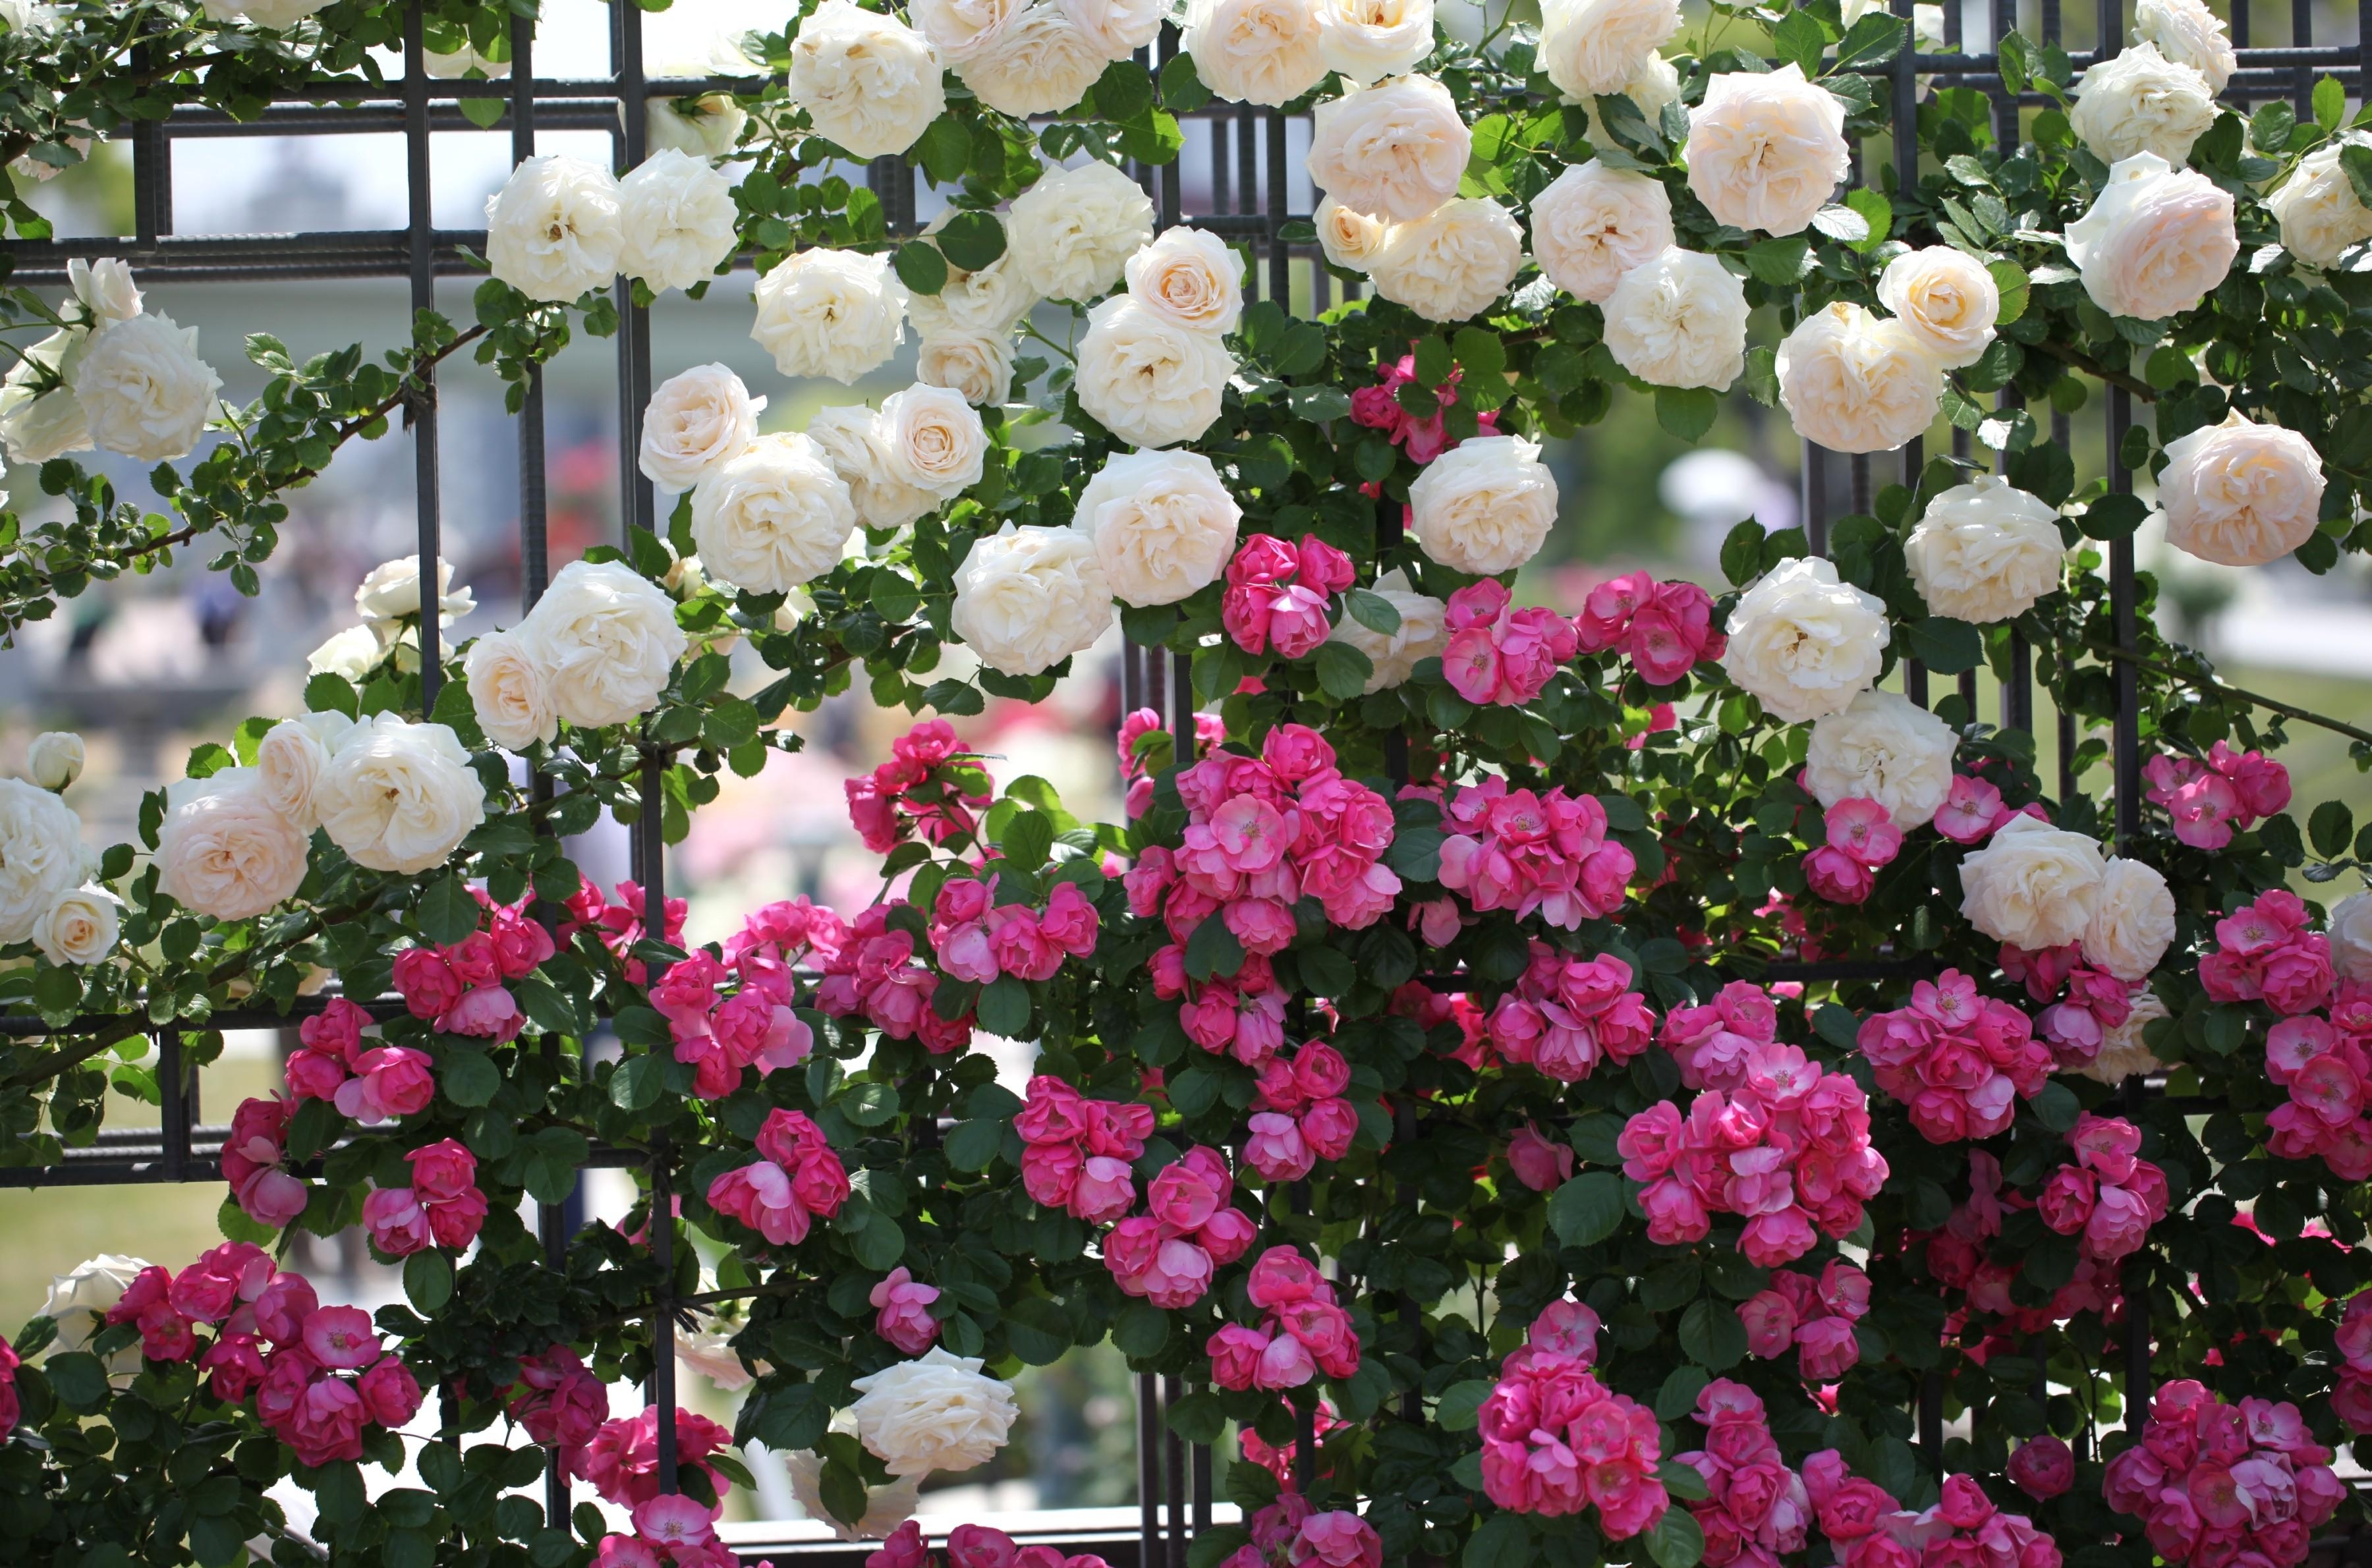 it's beautiful, roses, flowers, greens, fence, handsomely, different phone background